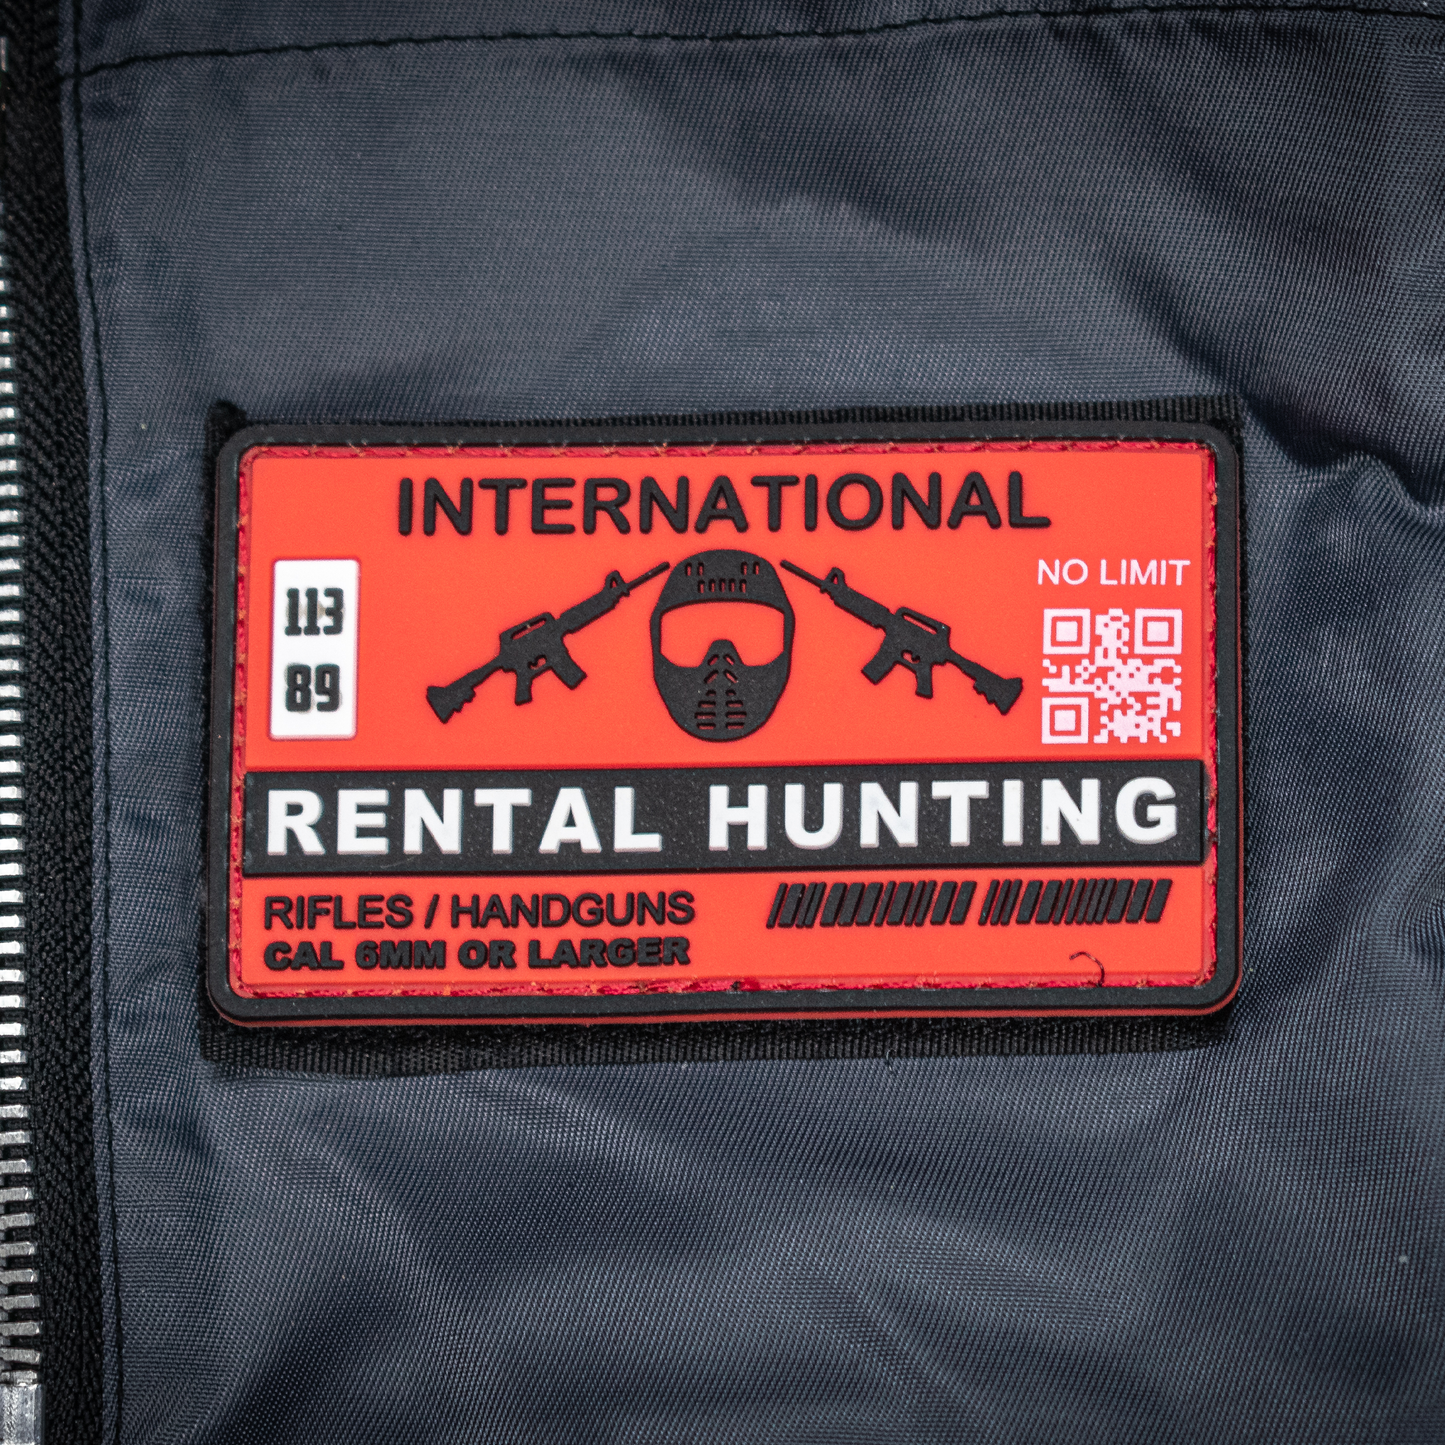 Rental Hunting Permit Patch